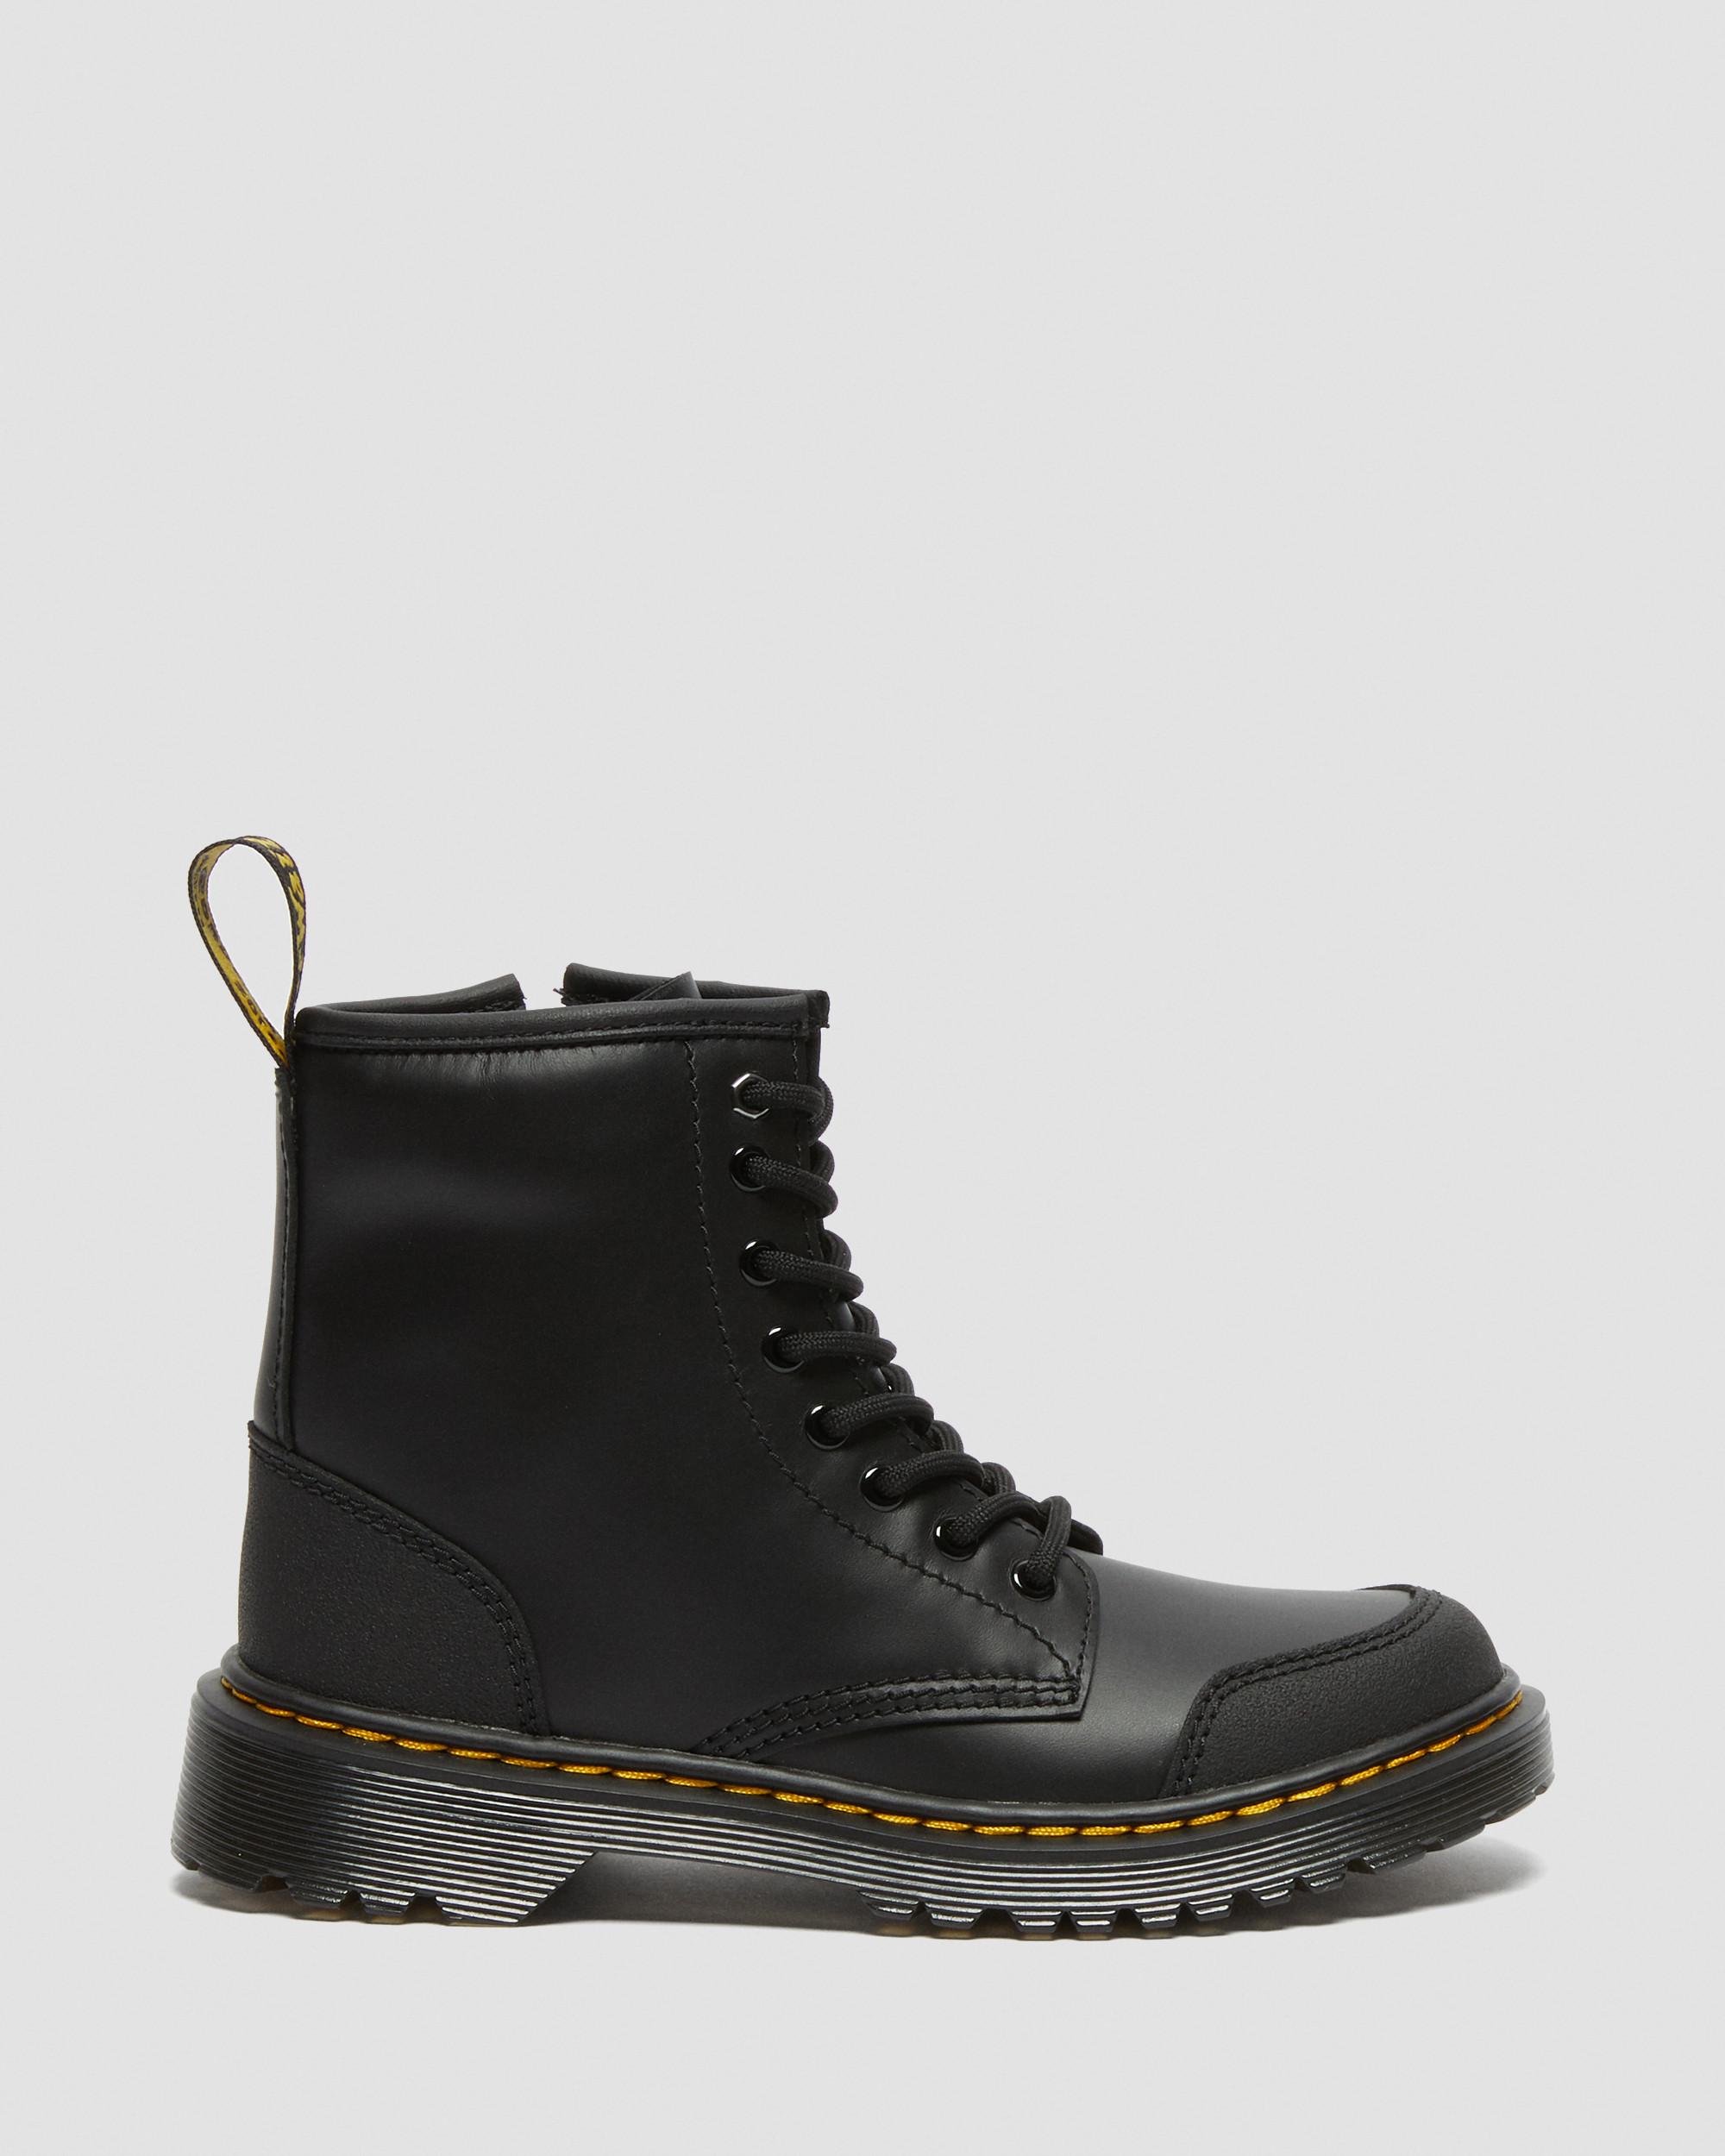 Junior 1460 Overlay Leather Boots in Black | Dr. Martens